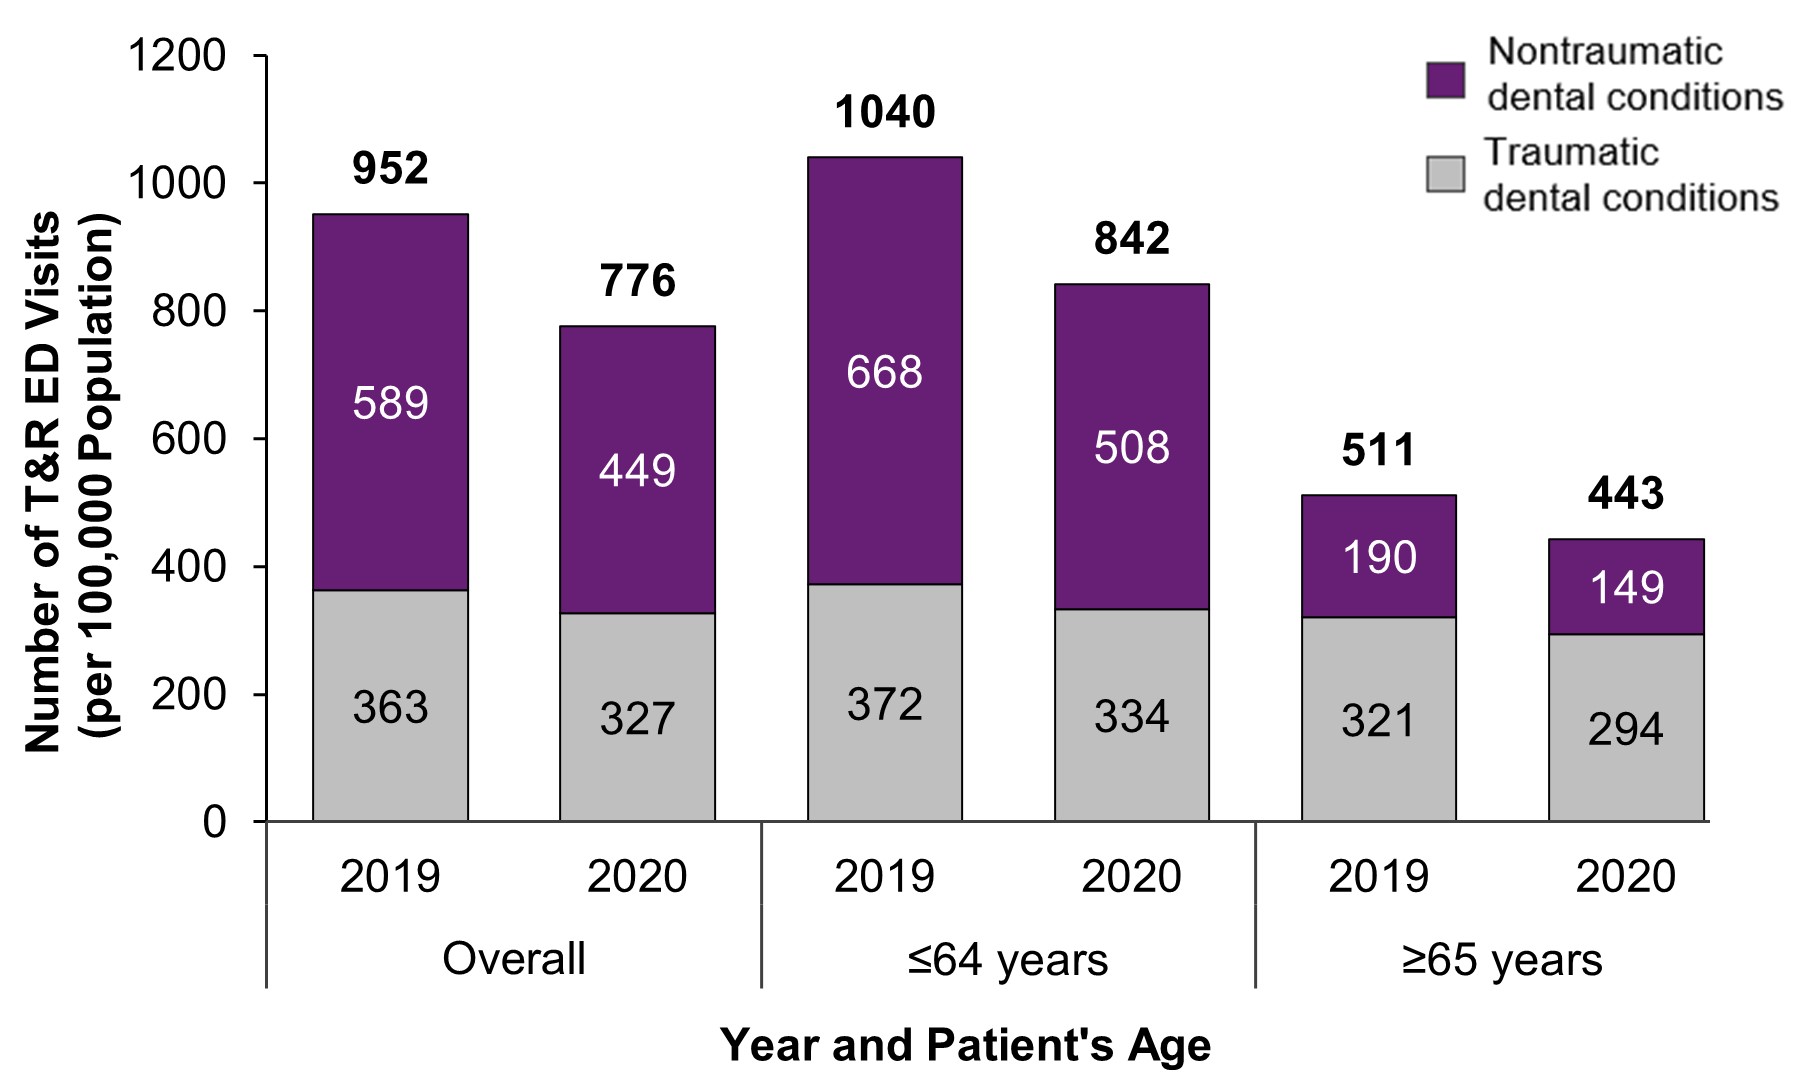 Number of treat-and-release ED visits for dental conditions per 100,000 population, overall and by age group and traumatic vs. nontraumatic conditions, 2019 and 2020